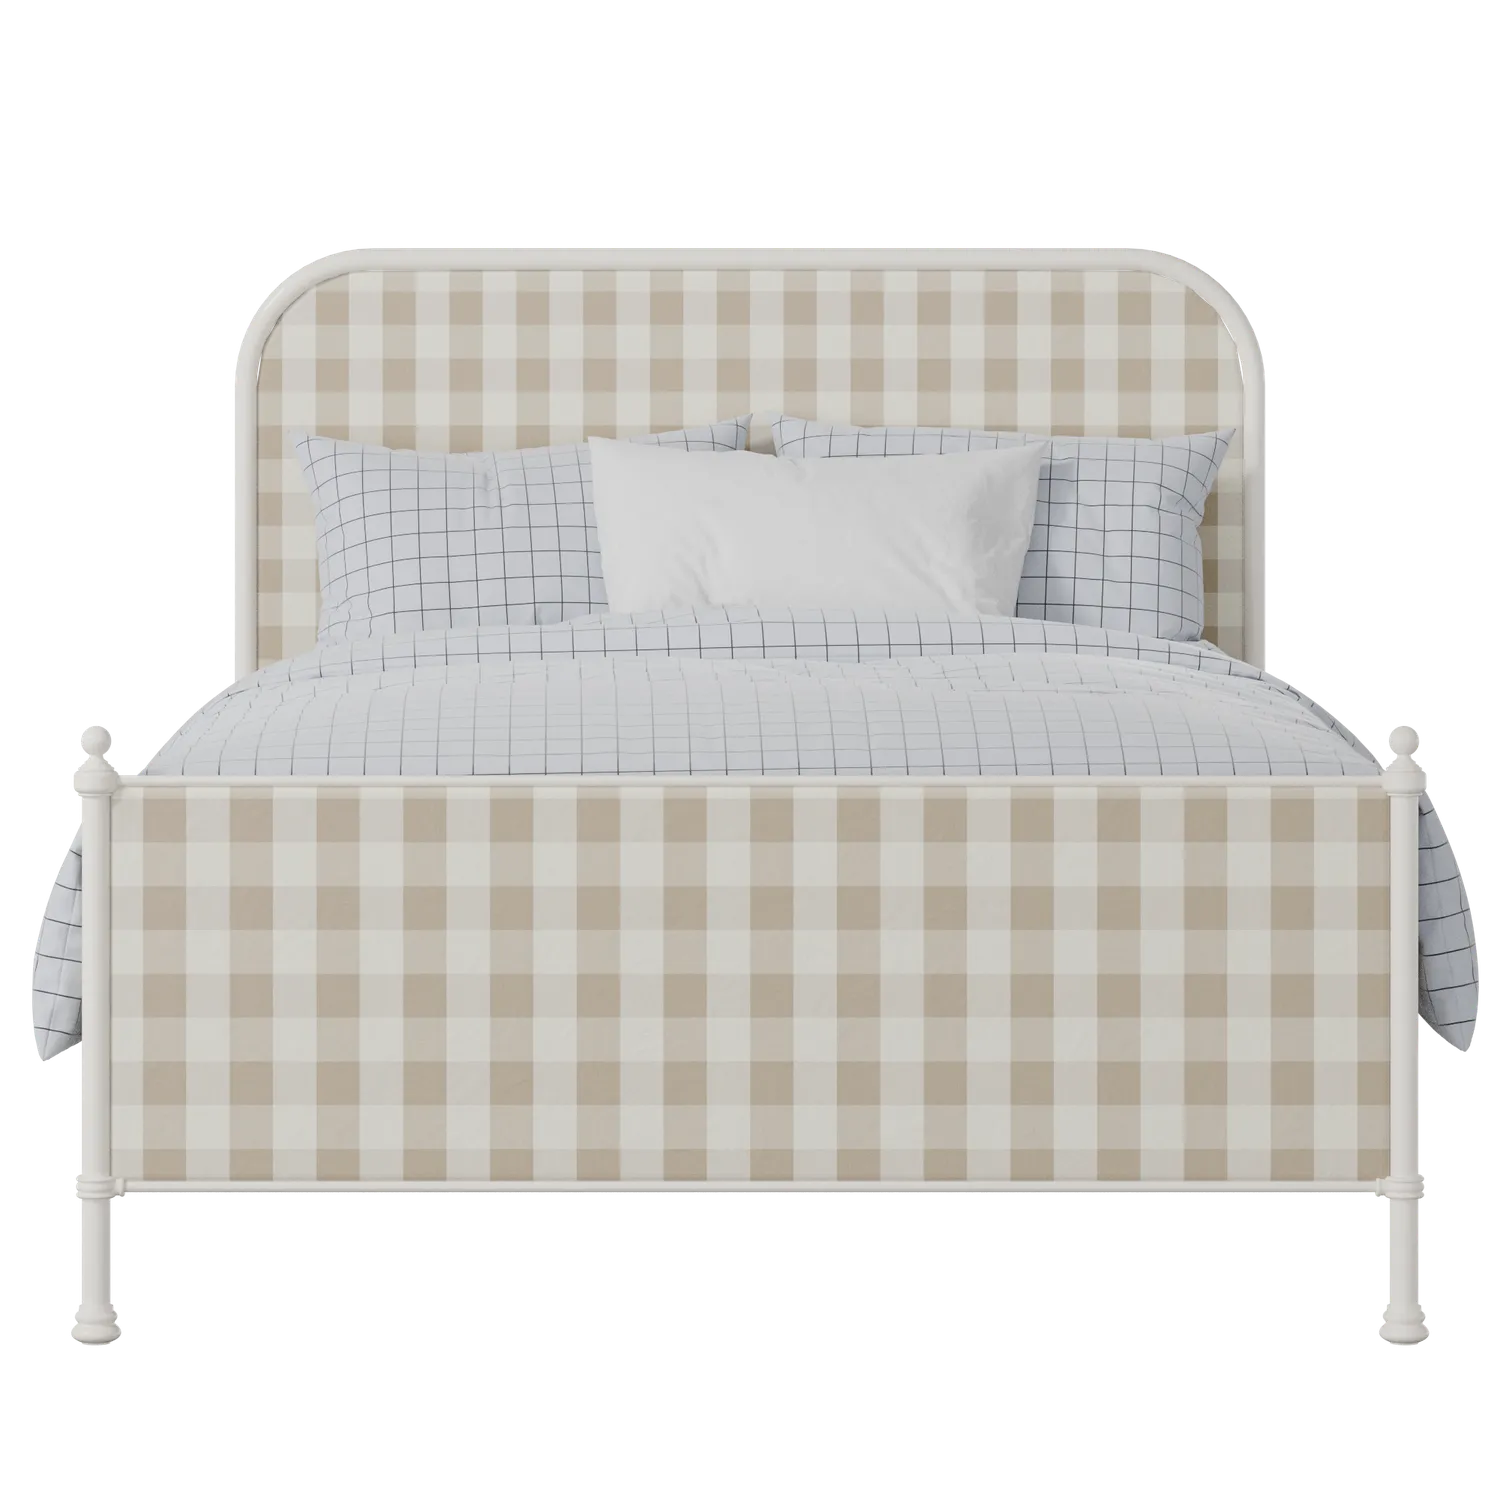 Bray iron/metal upholstered bed in ivory with grey fabric